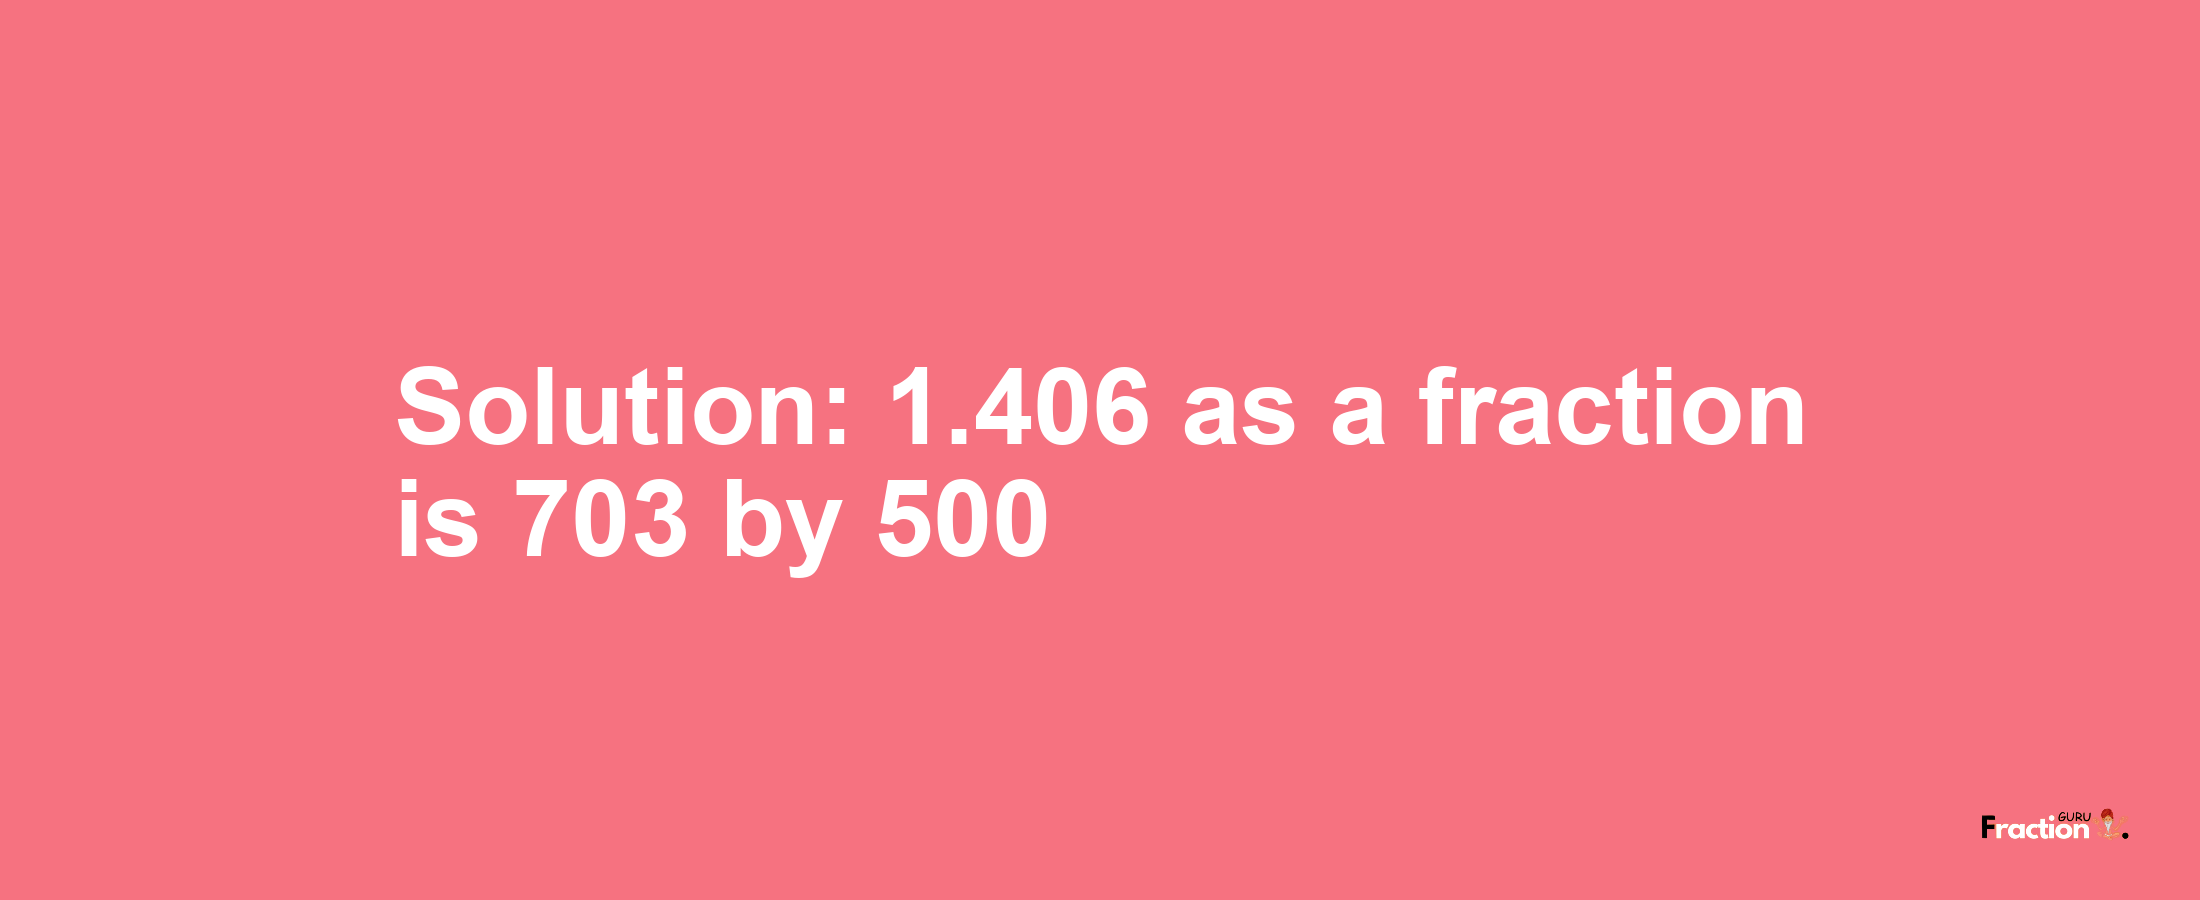 Solution:1.406 as a fraction is 703/500